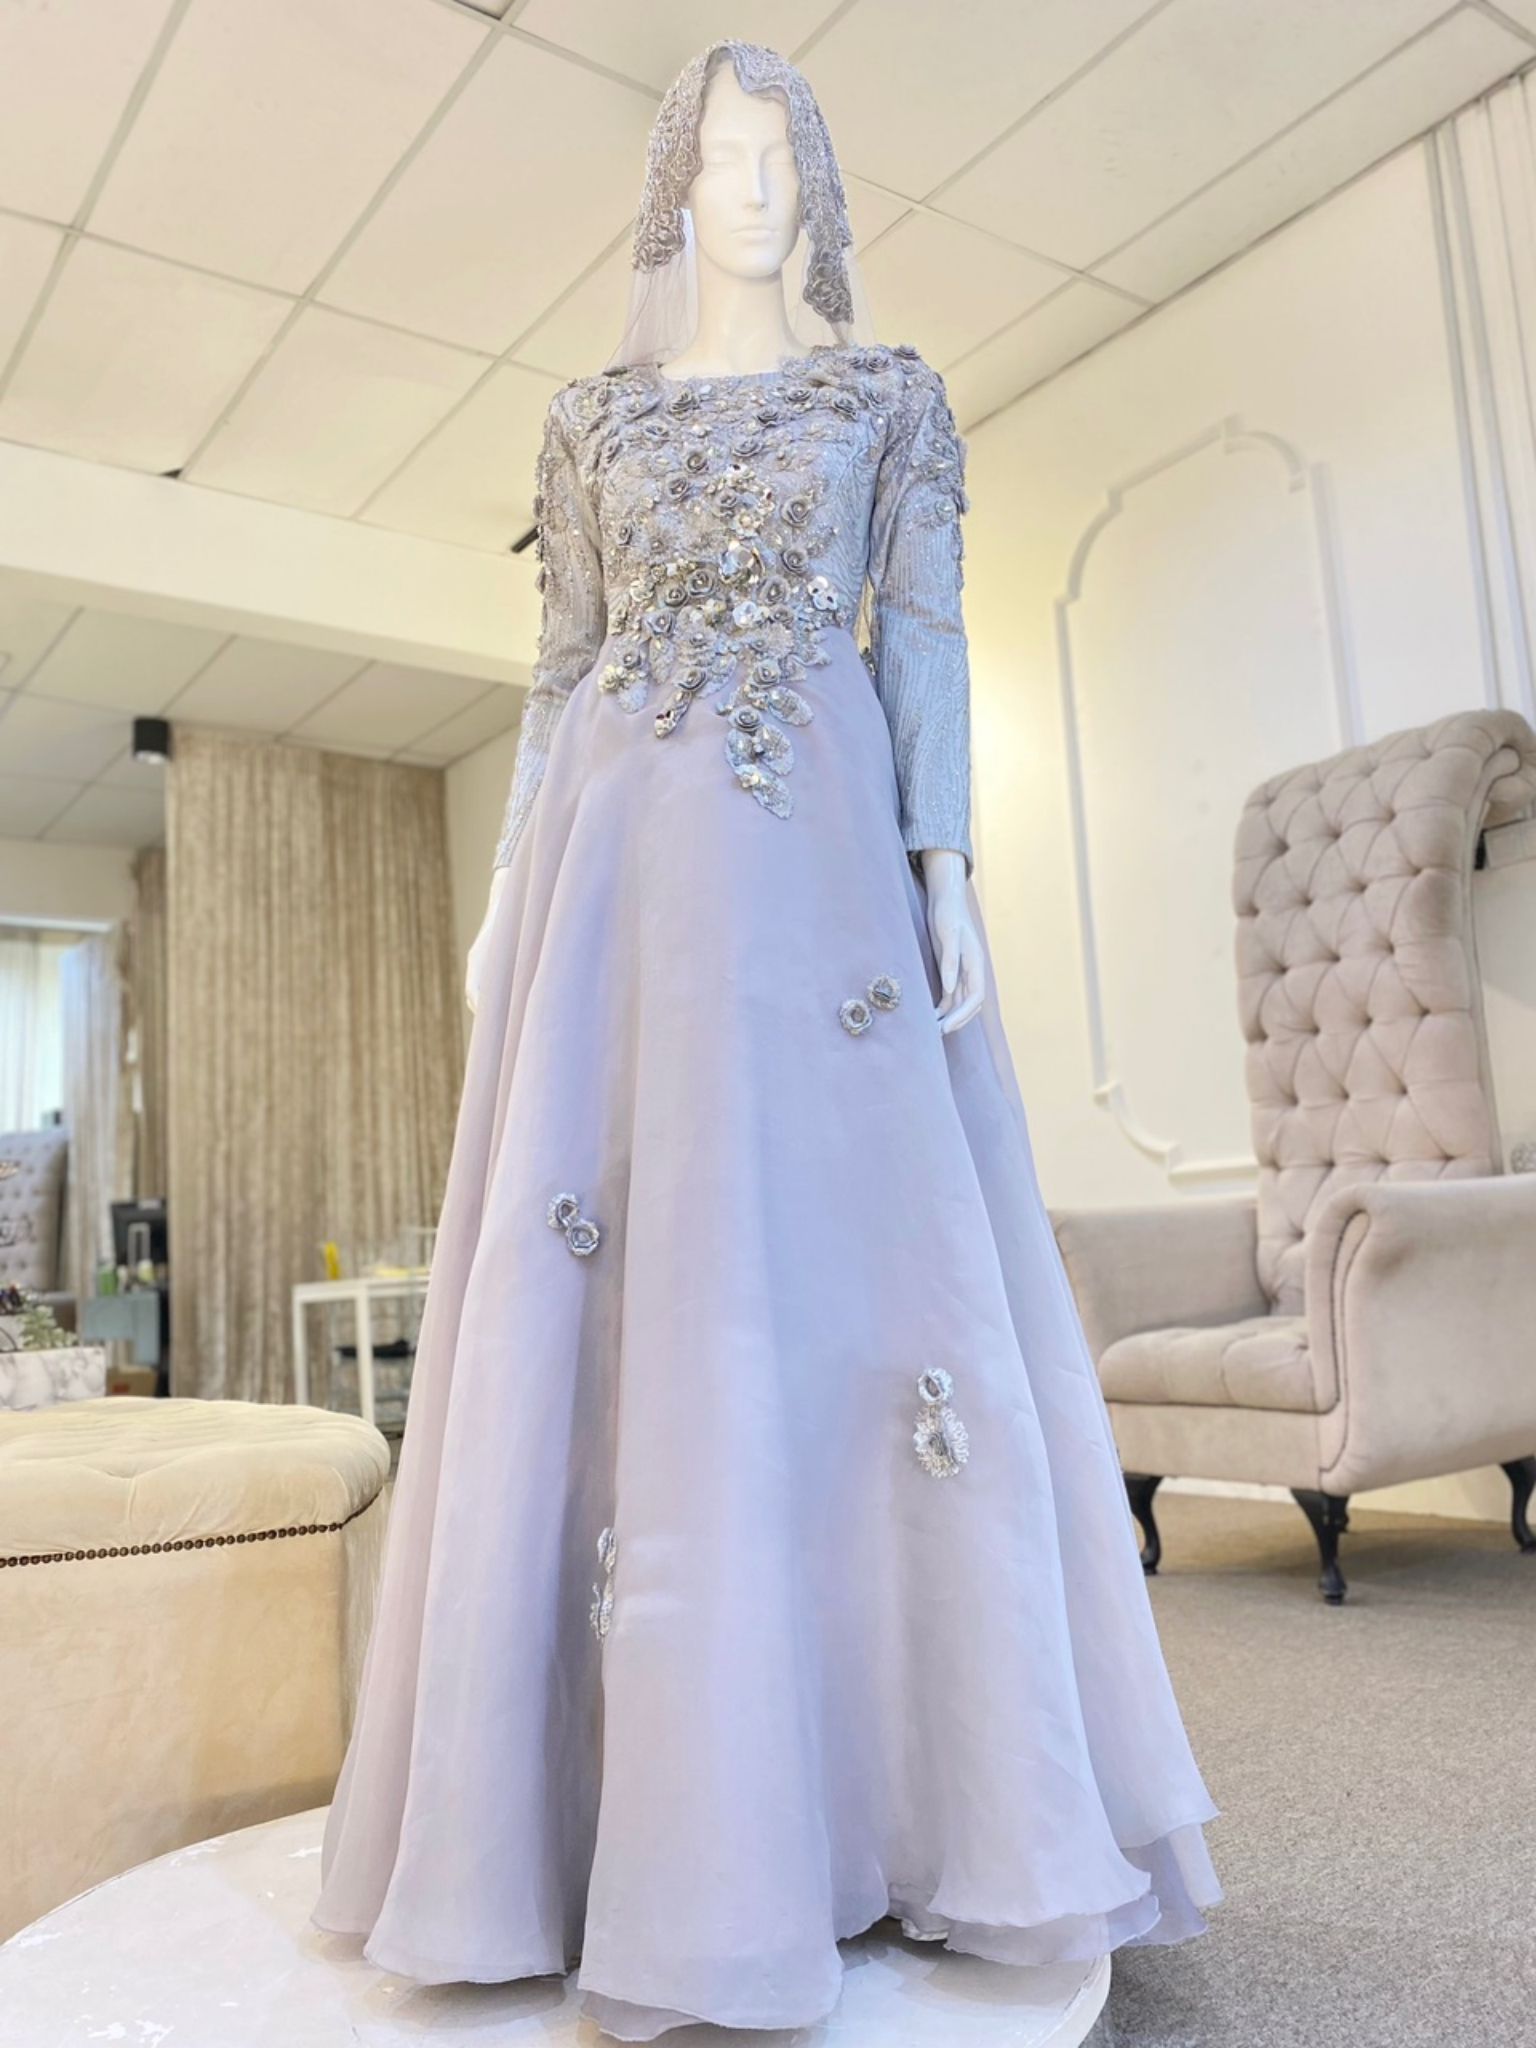 Madeleine is a stunning silver grey glitter lace ballgown muslimah dress that is perfect for the modern bride. With its elegant design and flattering fit, Madeleine is sure to turn heads on your big day. Made from luxurious glitter lace and organza, this dress is the perfect way to celebrate your special day.